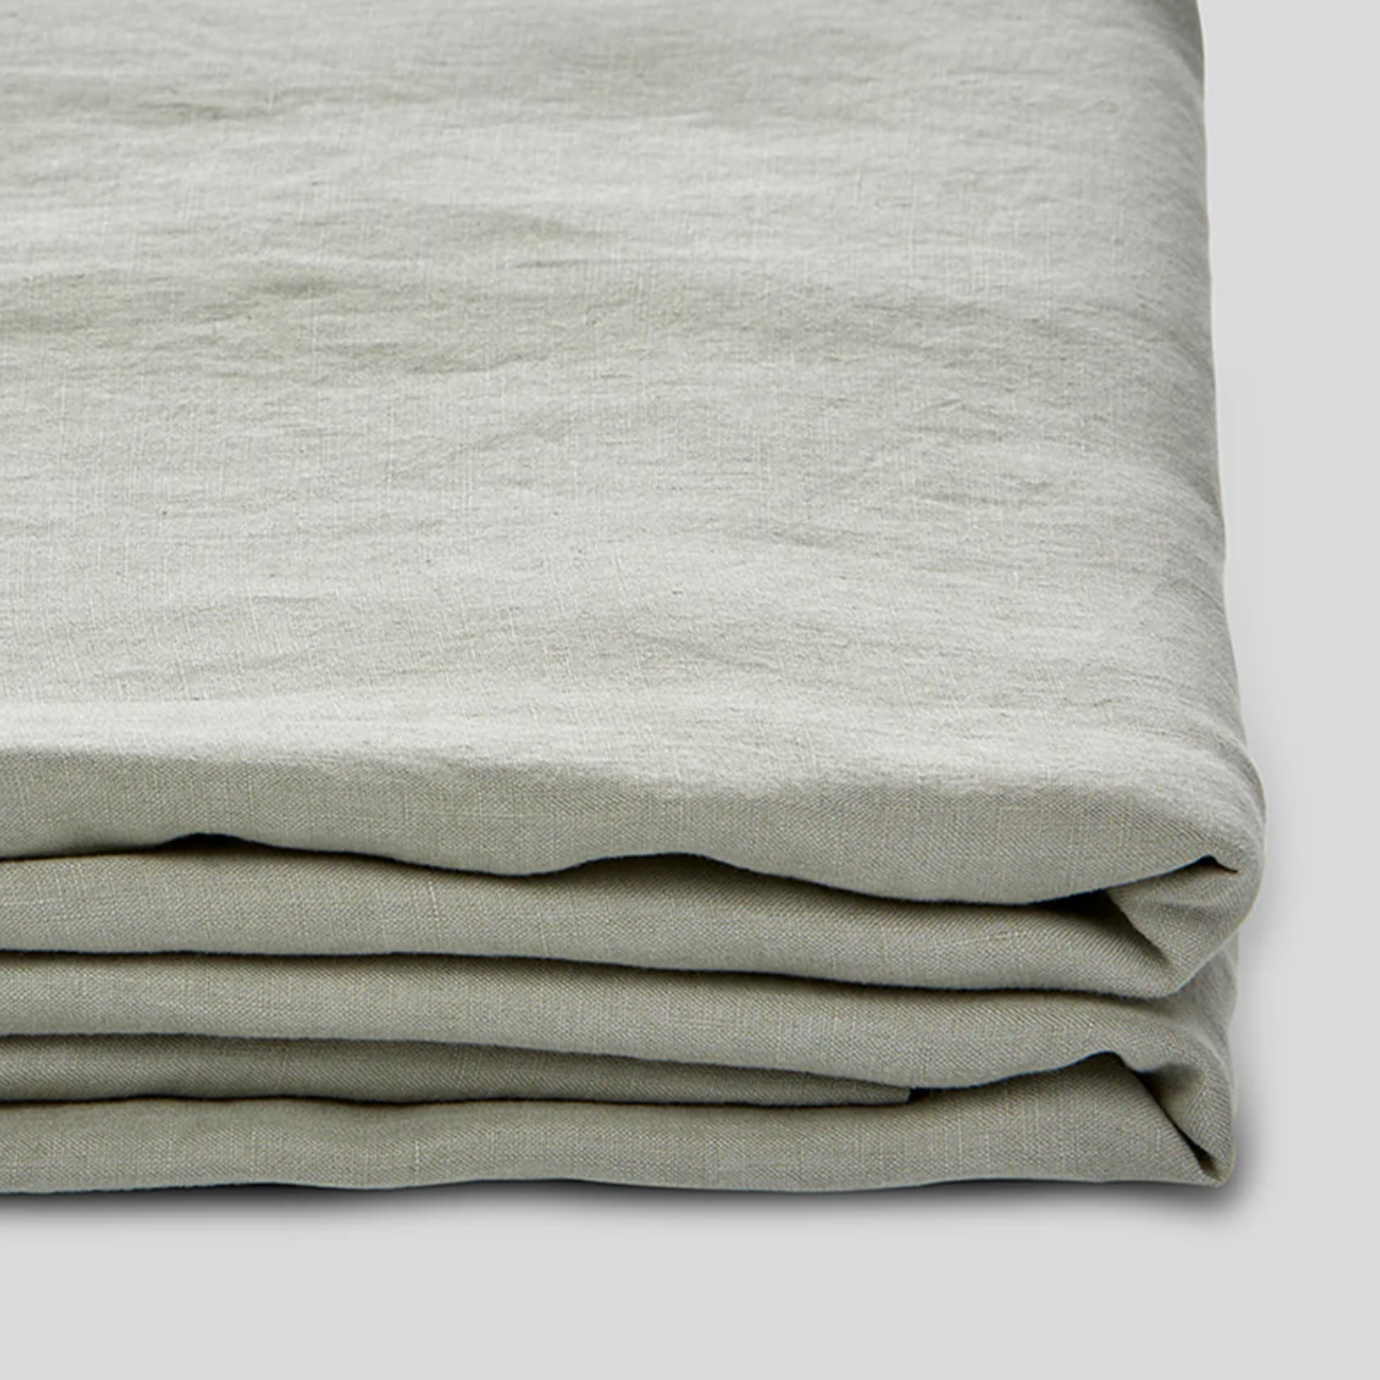 100% Linen Fitted Sheet in Stone